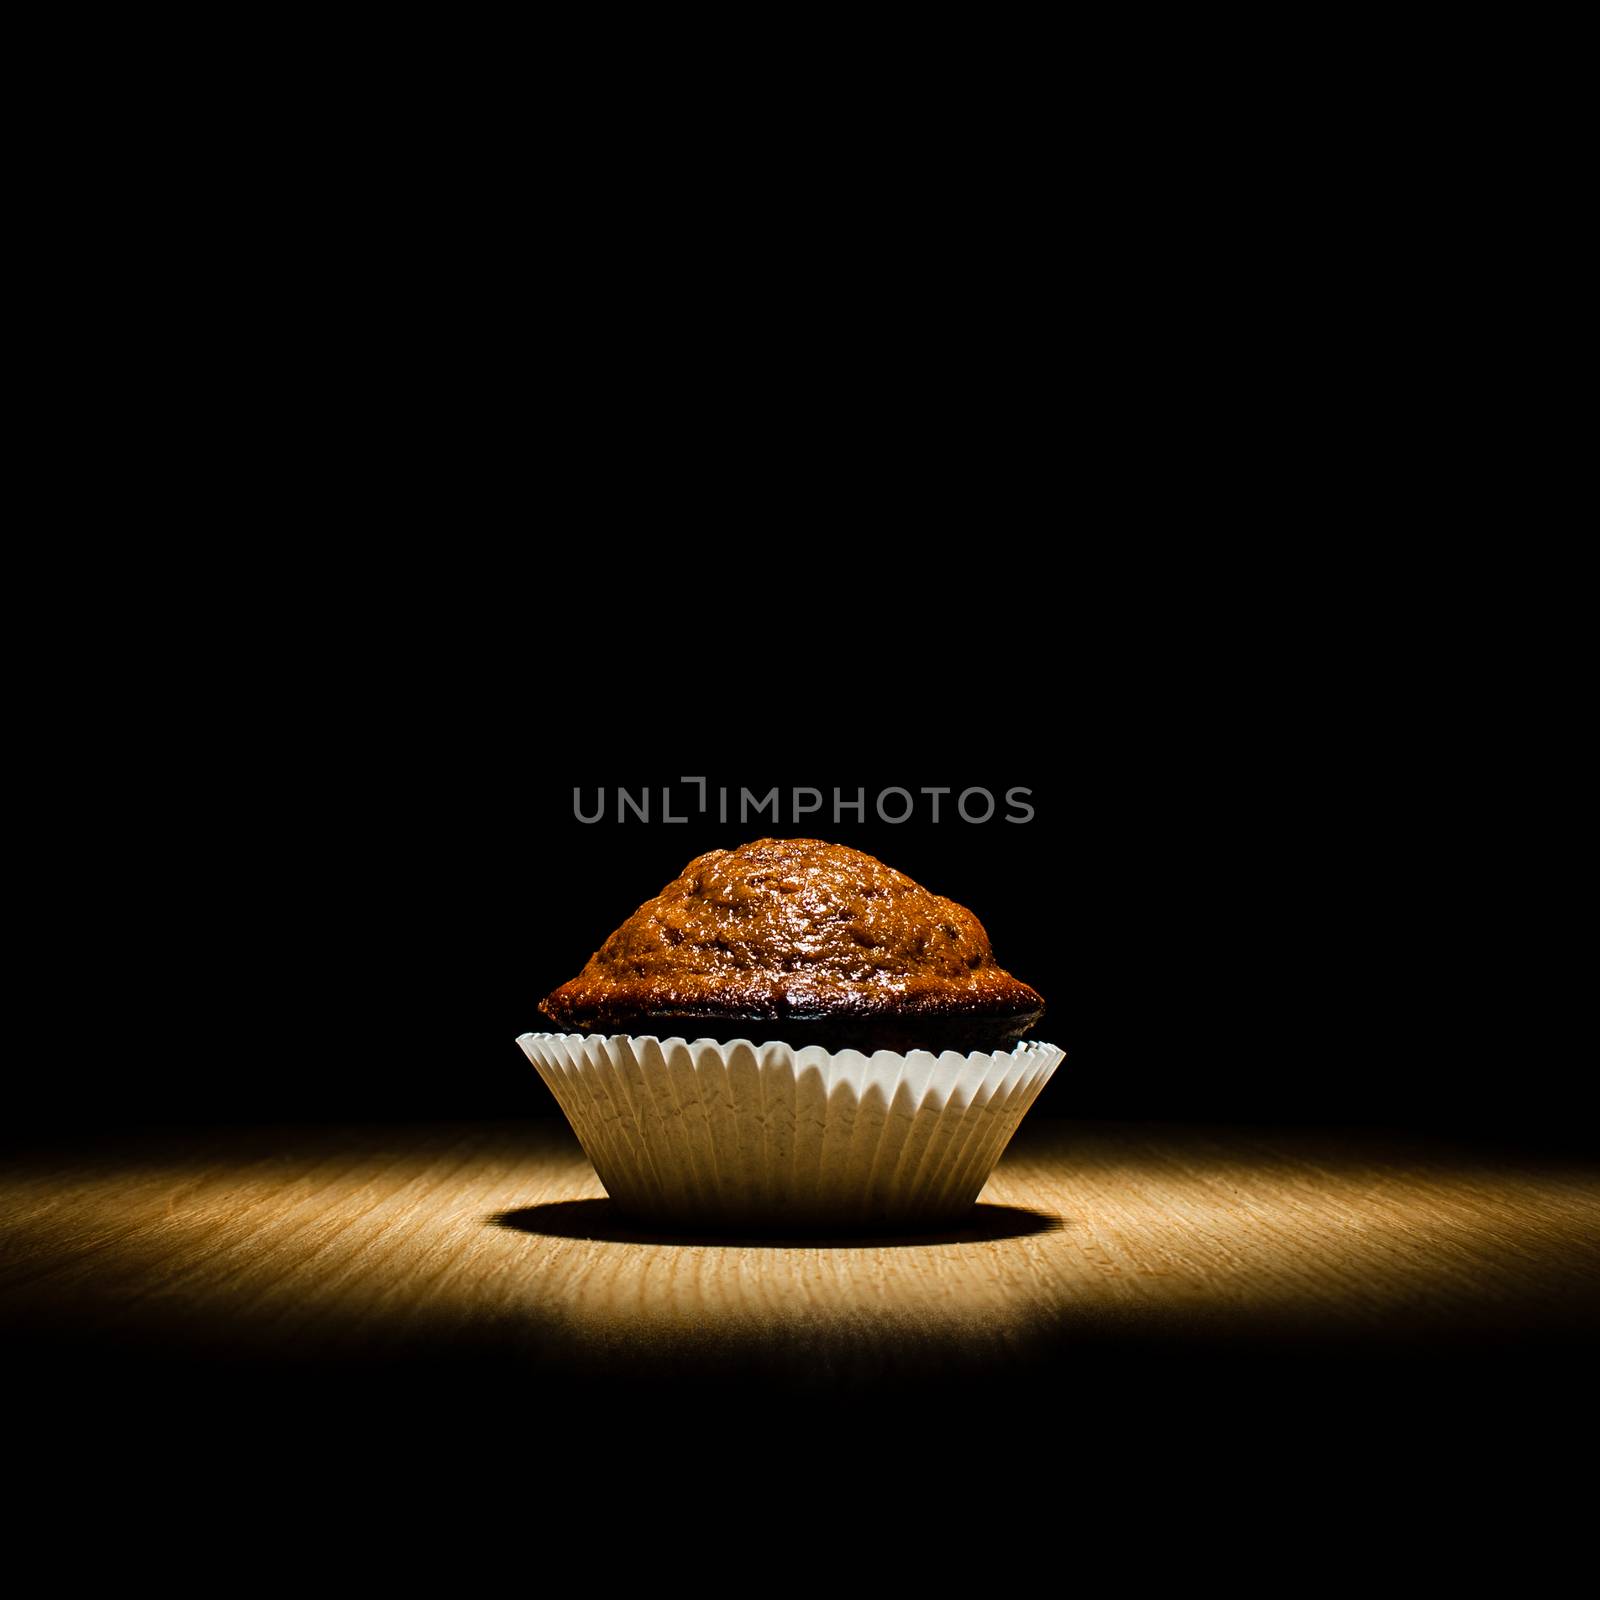 Chocolate muffin, freshbaked from the oven, on a wooden table.